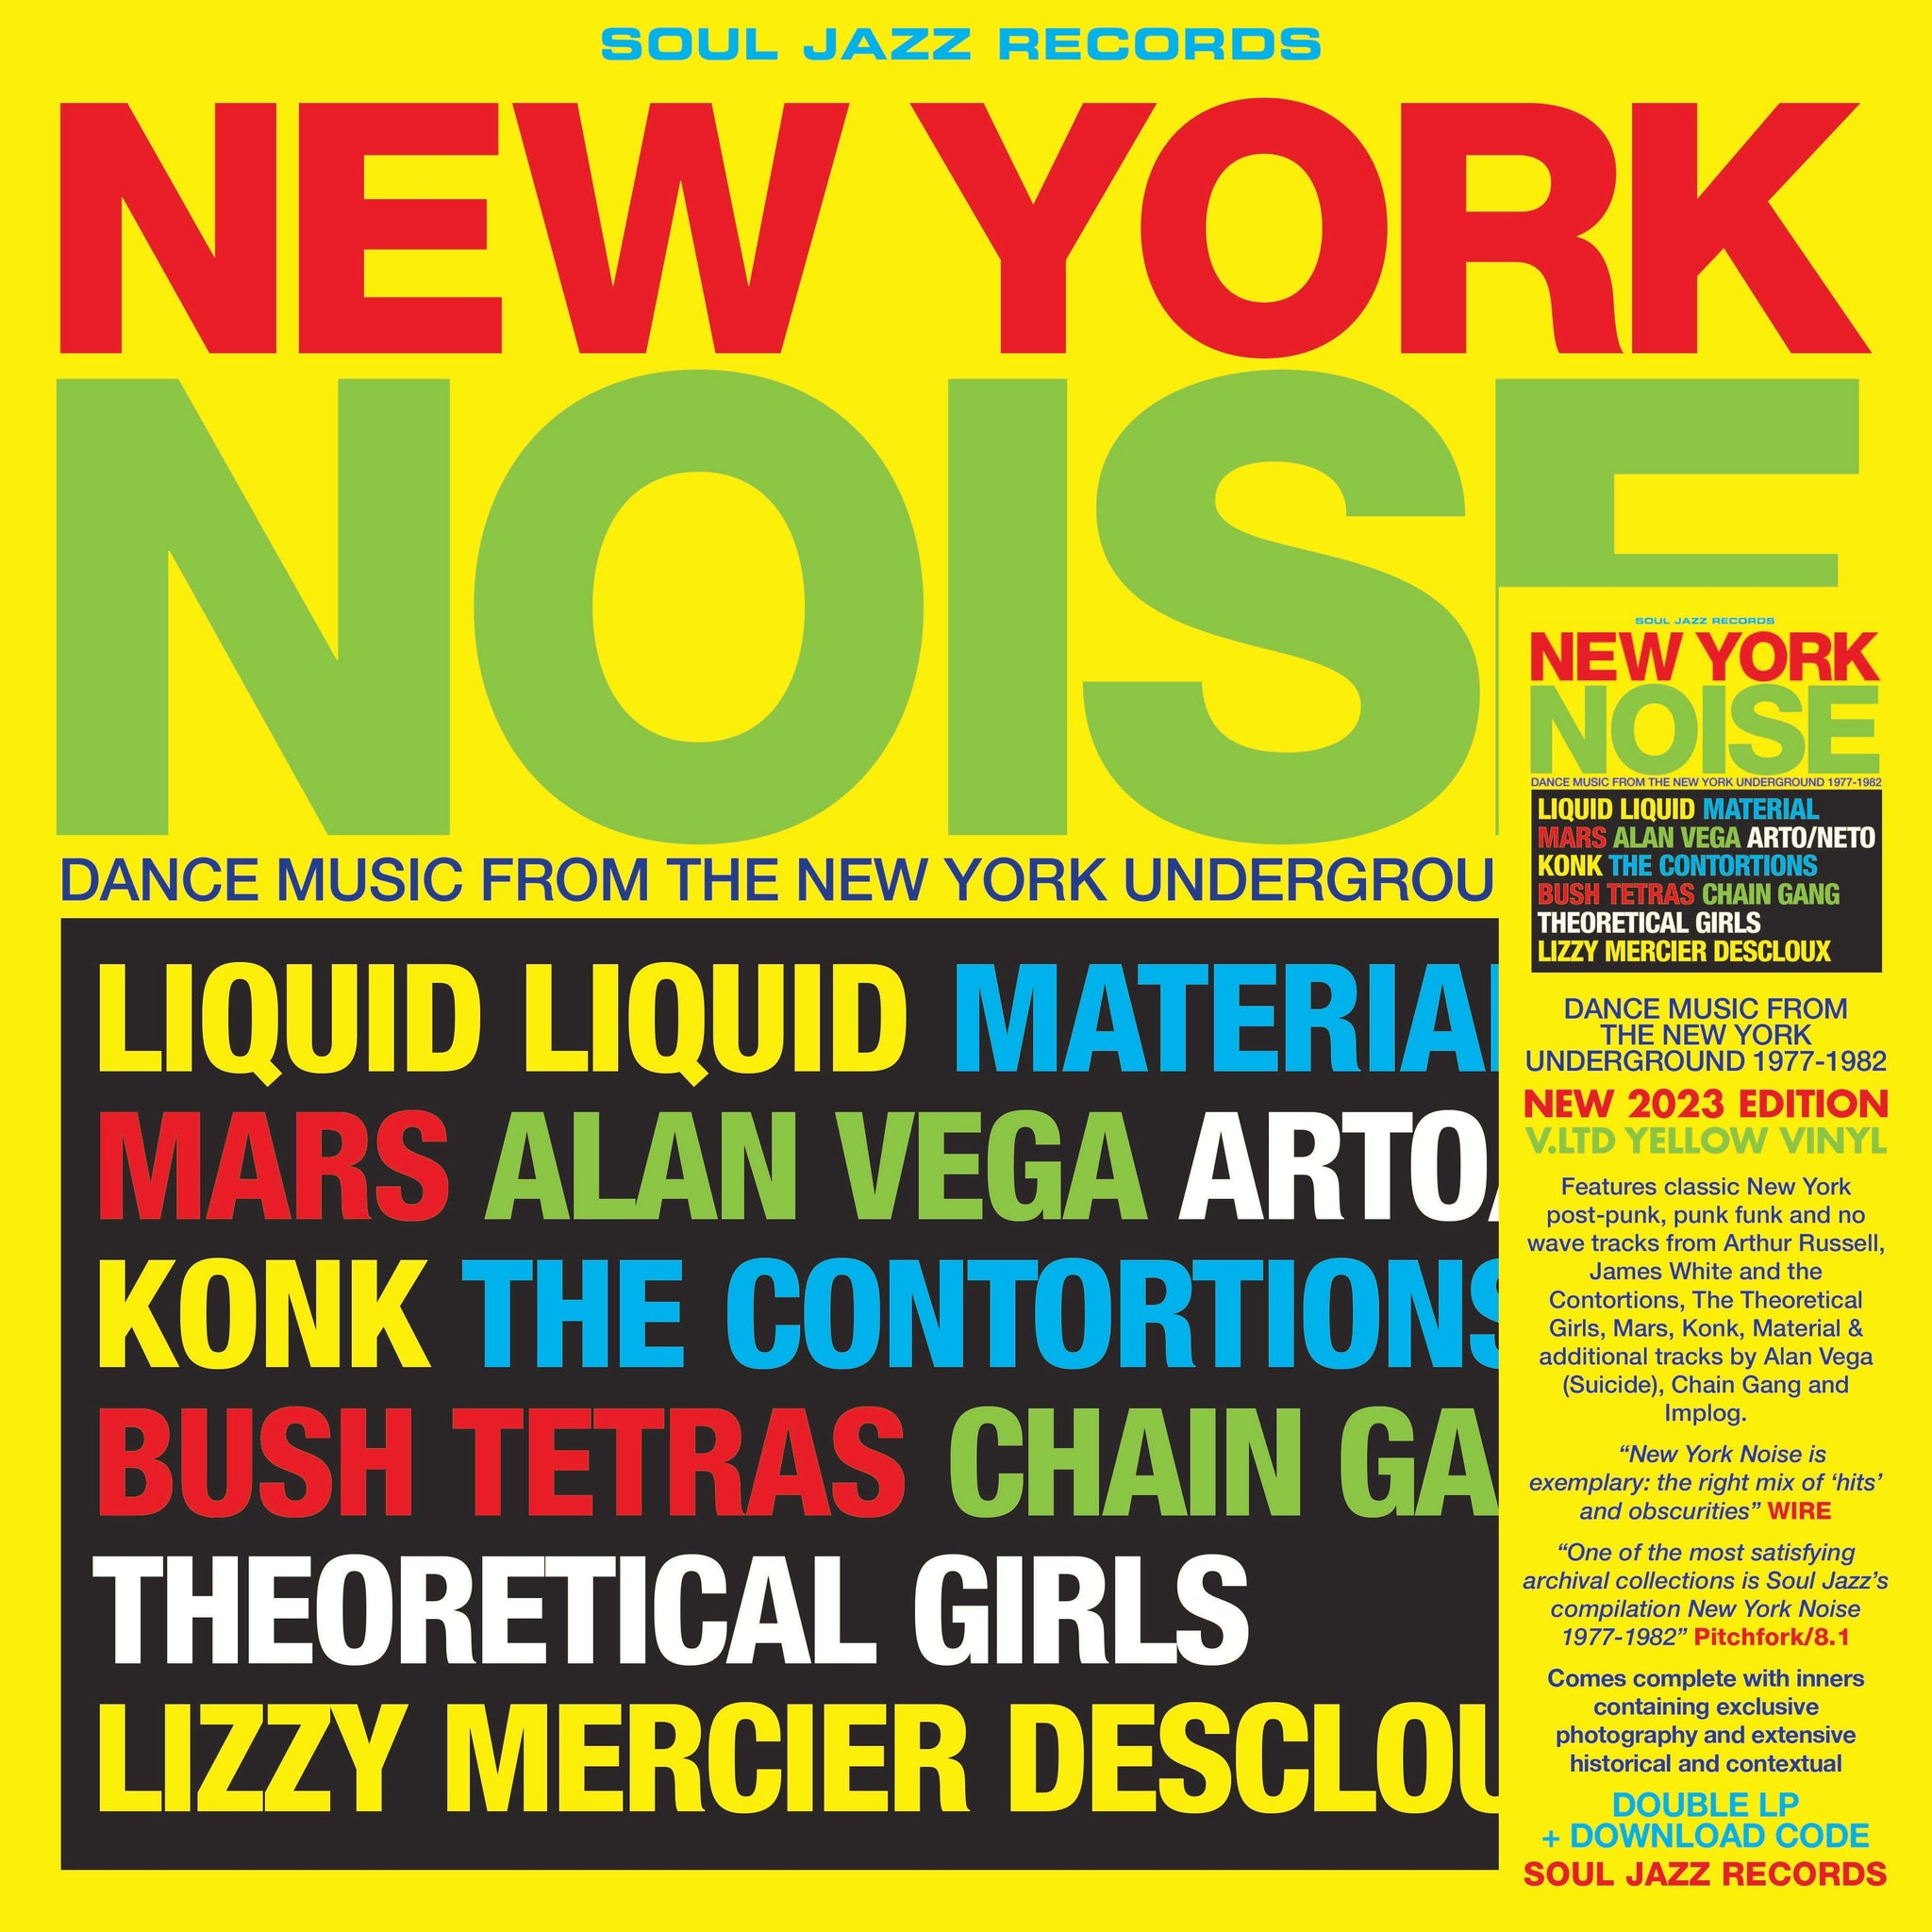 VARIOUS - Soul Jazz Records Presents: New York Noise: Dance Music from The New York Underground 1978-82 - 2LP - Yellow Vinyl [RSD23]